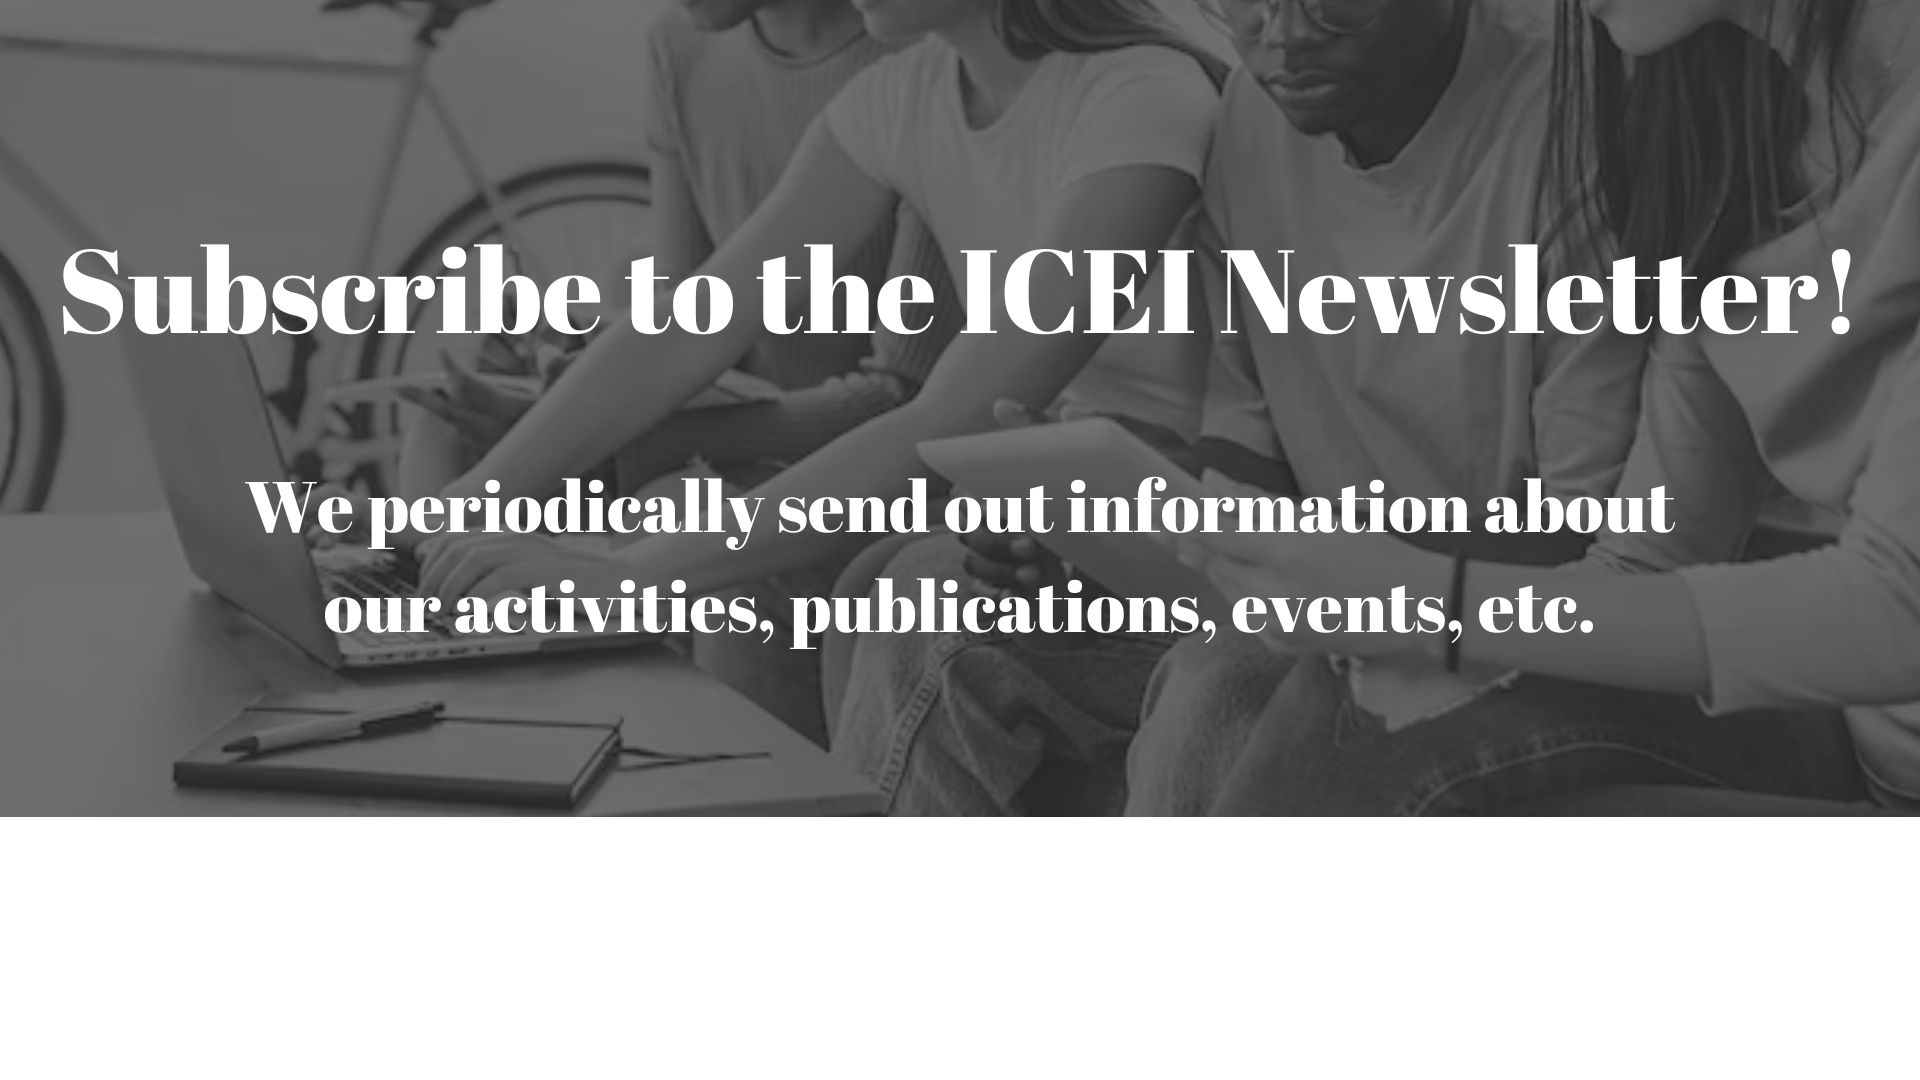 Suscribe to the ICEI Newsletter